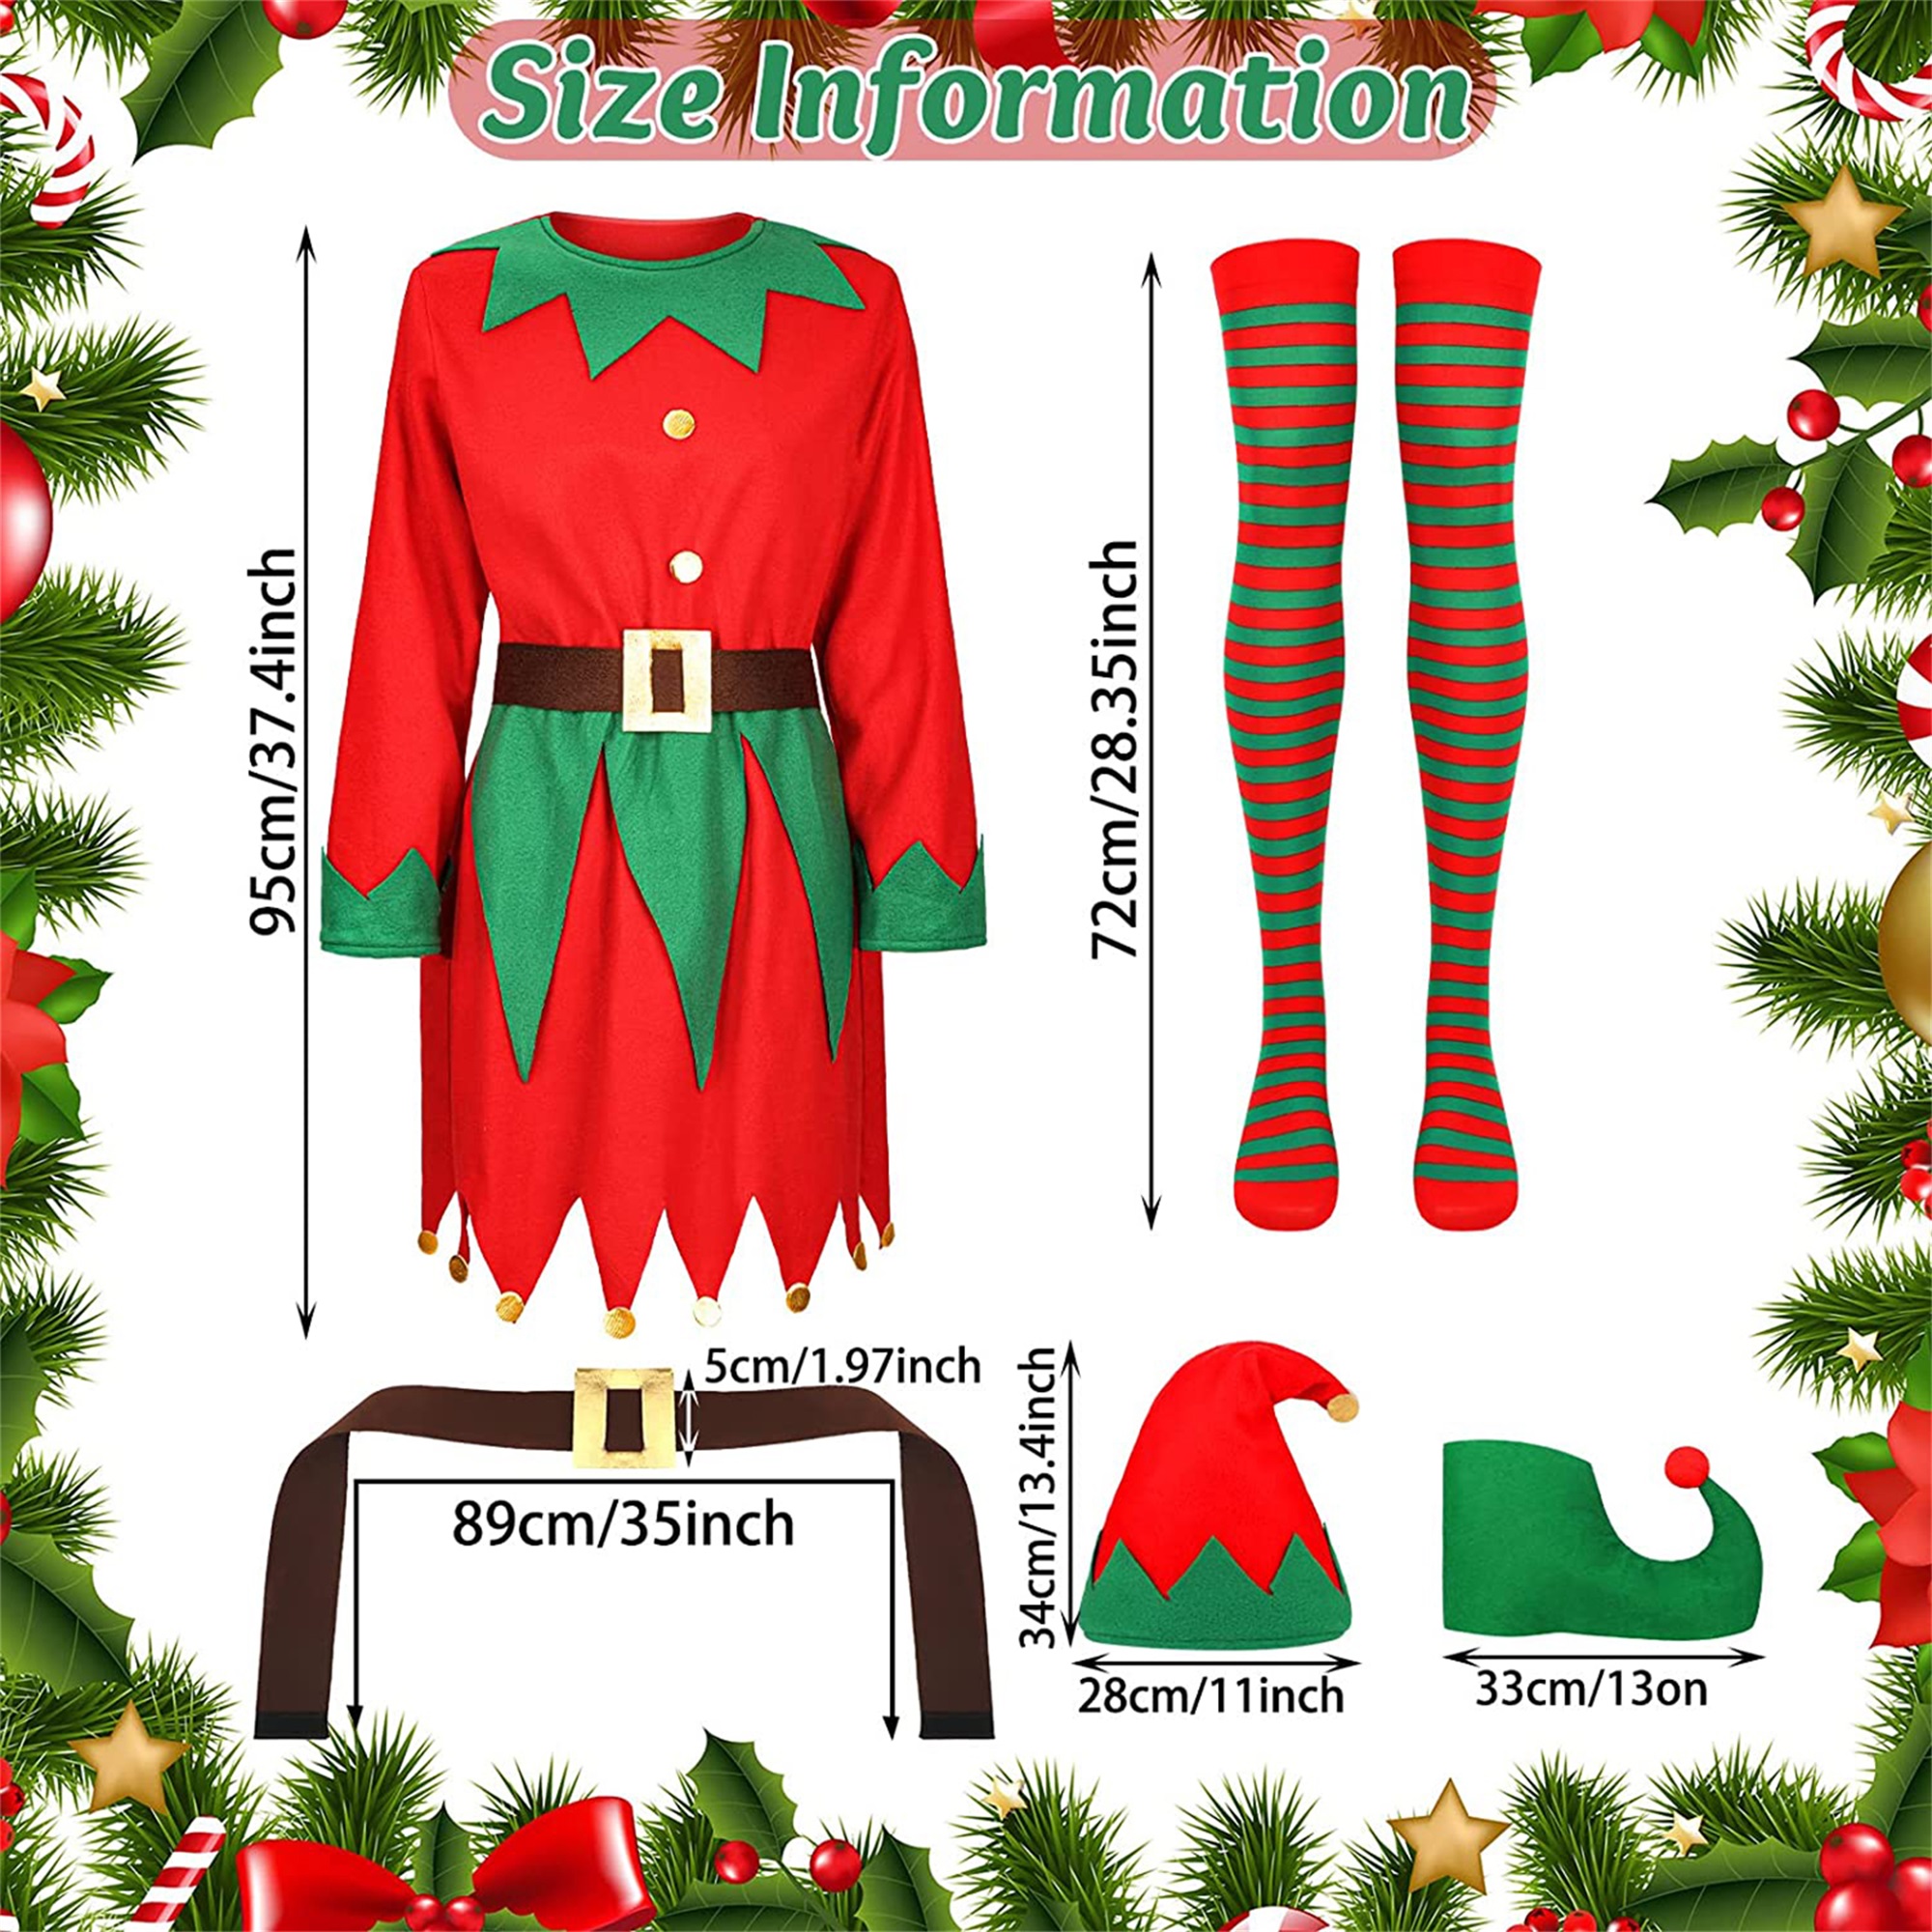 Douhoow Women Christmas Elf Girl Costume, Long Sleeve Dress+Hat+Shoes+Striped Stockings - image 5 of 9